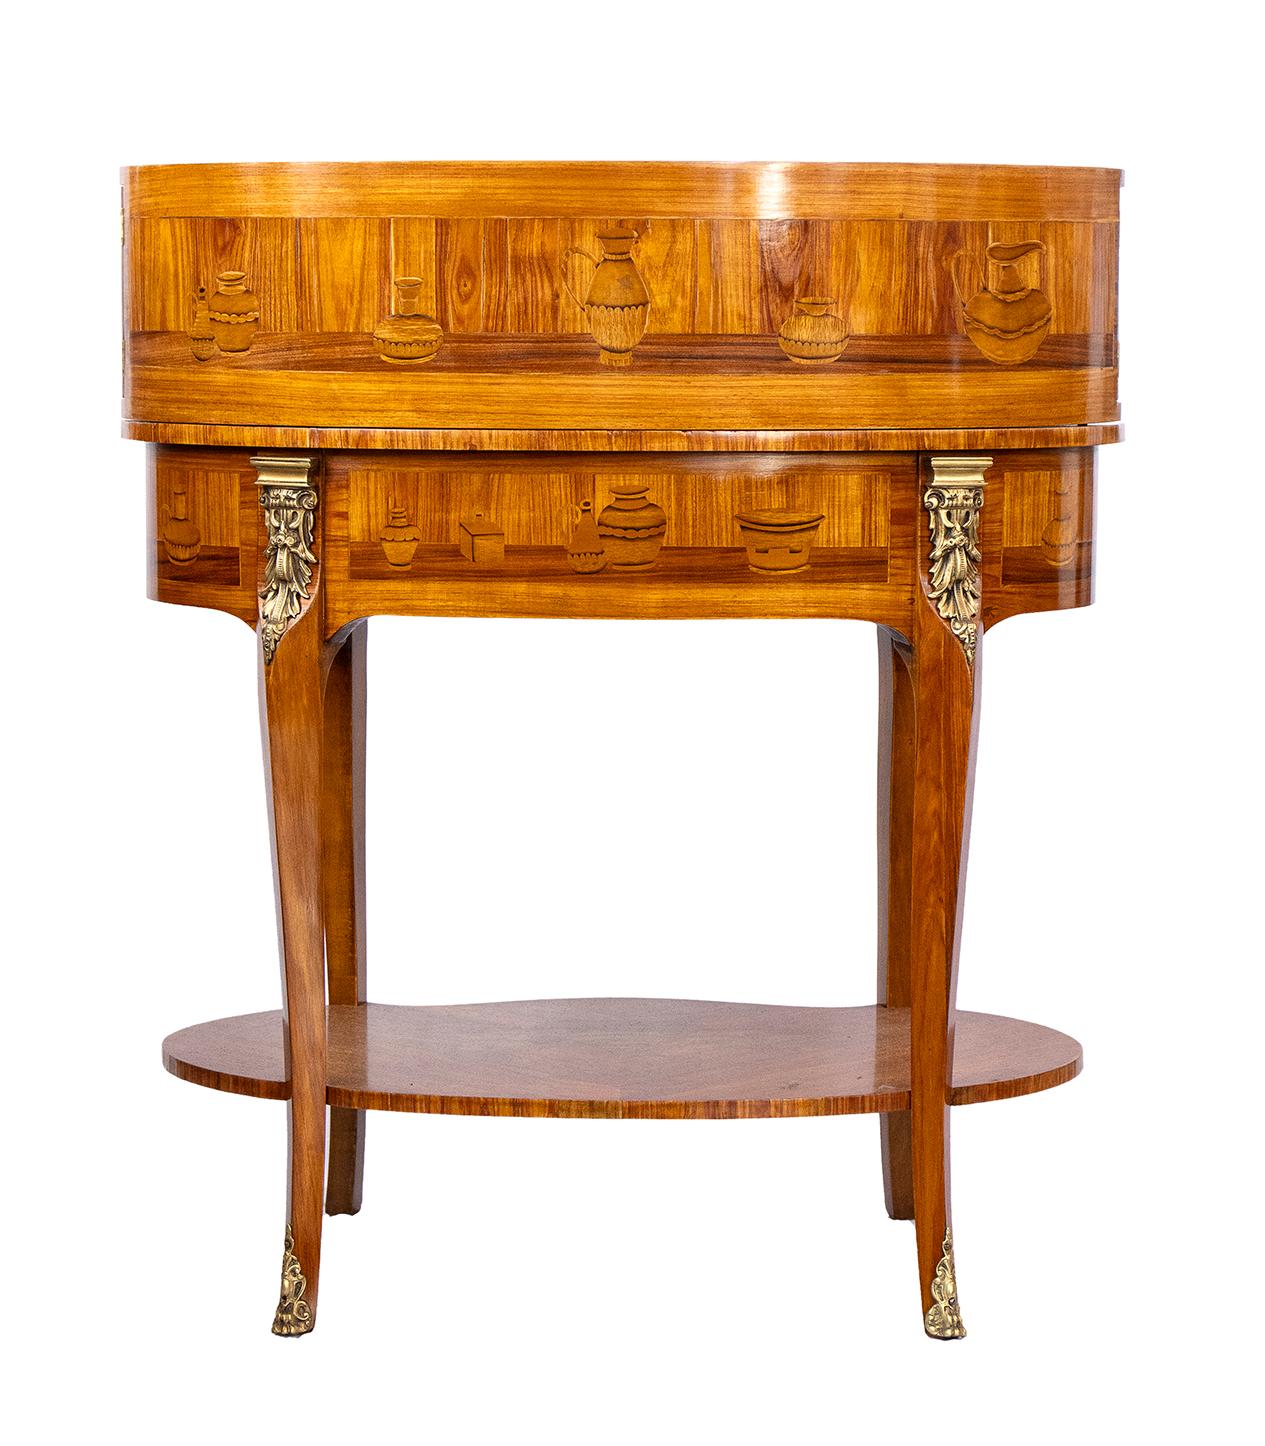 Inlay 20th Century France Louis XV Kingwood Inlaid Marquetry Desk and Writing Table